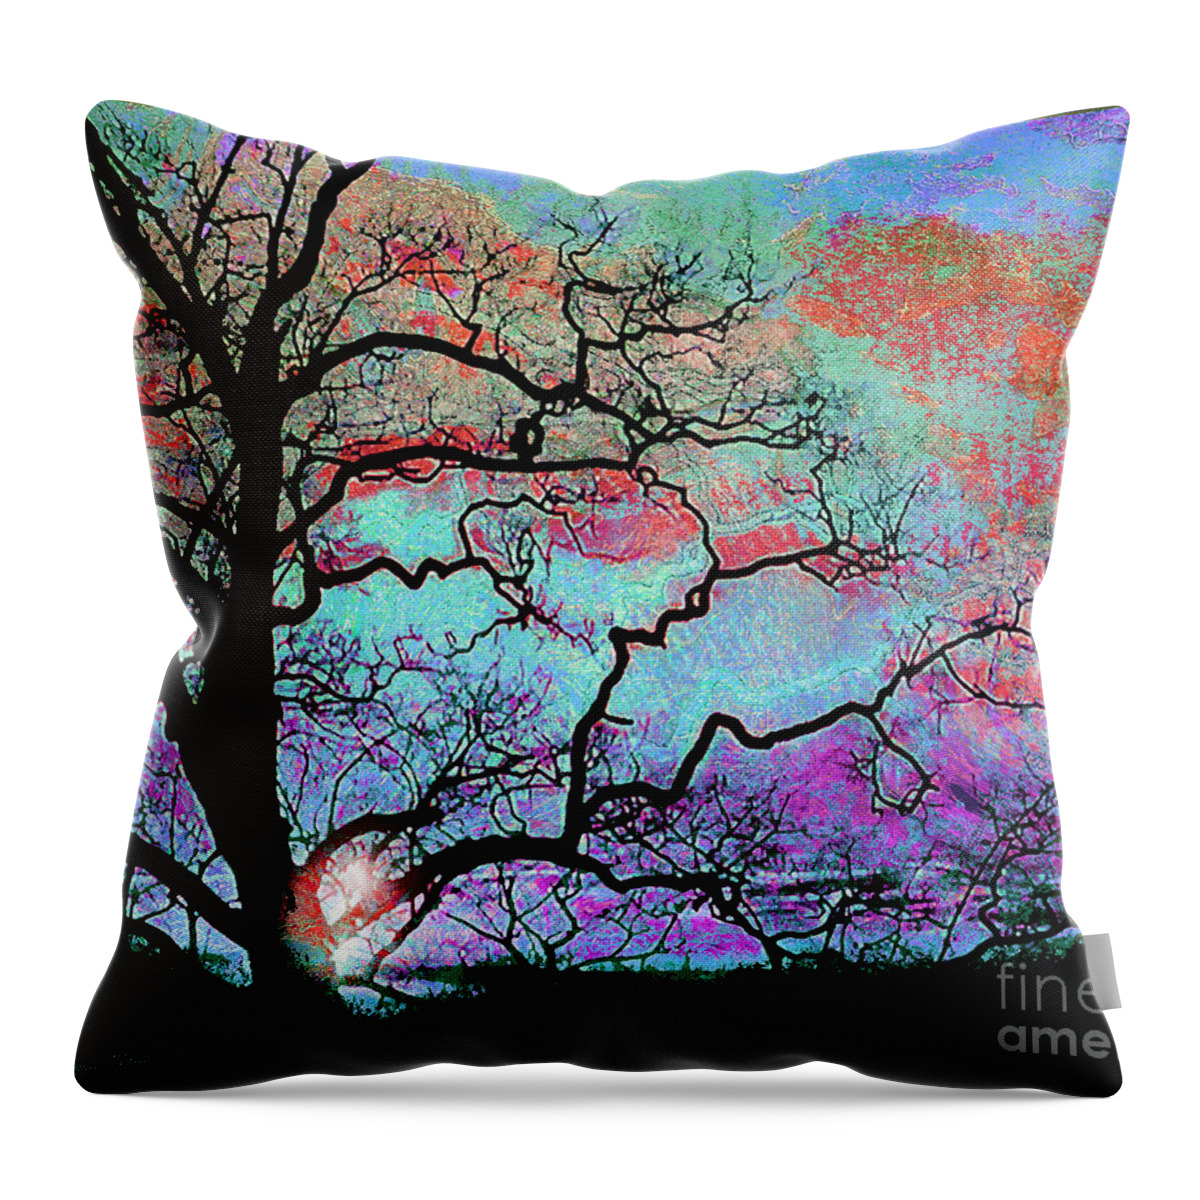 Colorful Throw Pillow featuring the painting Colorful Morning by Bonnie Marie